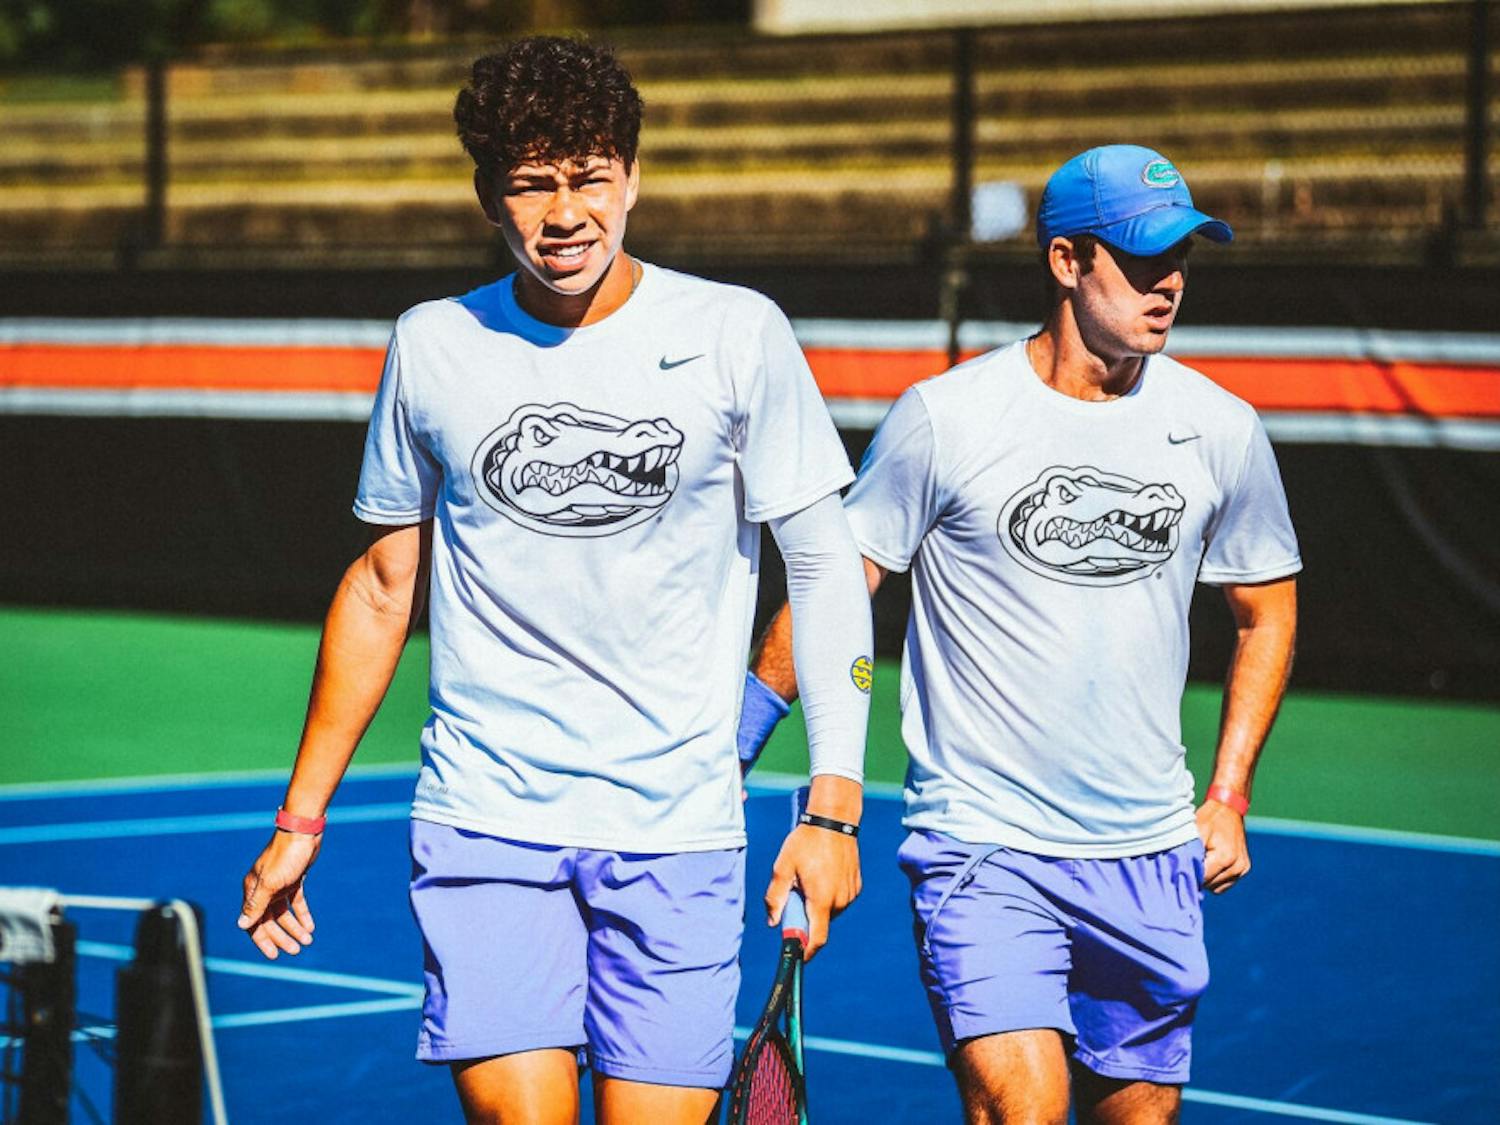 Freshman Ben Shelton walks alongside doubles teammate Will Grant after dropping a match, 8-7, against Auburn on Oct. 2 at the Tiger Fall Invitational in Auburn, Alabama.